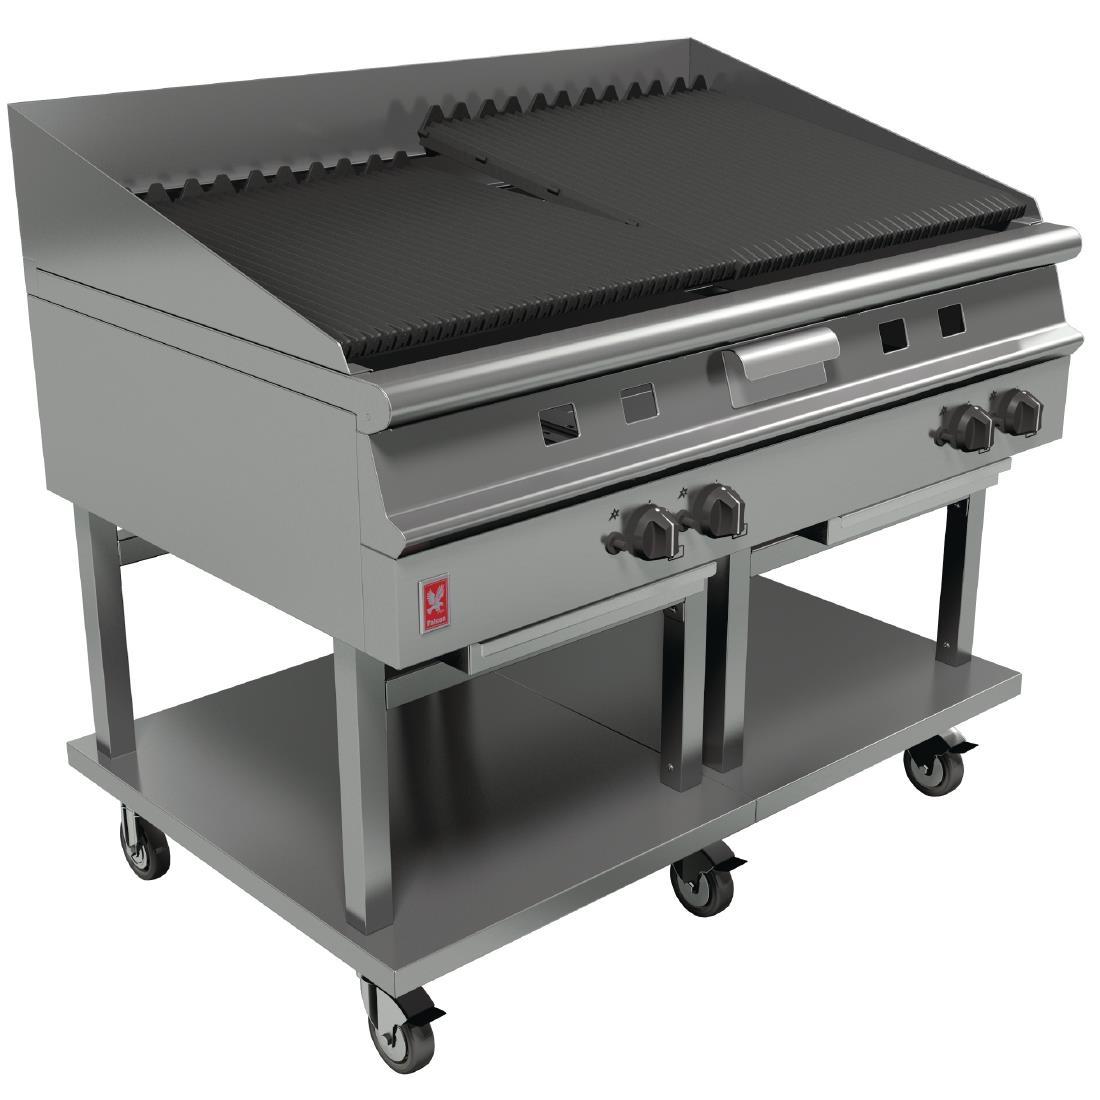 Falcon Dominator Plus LPG Chargrill On Mobile Stand G31225 - GP031-P  - 1